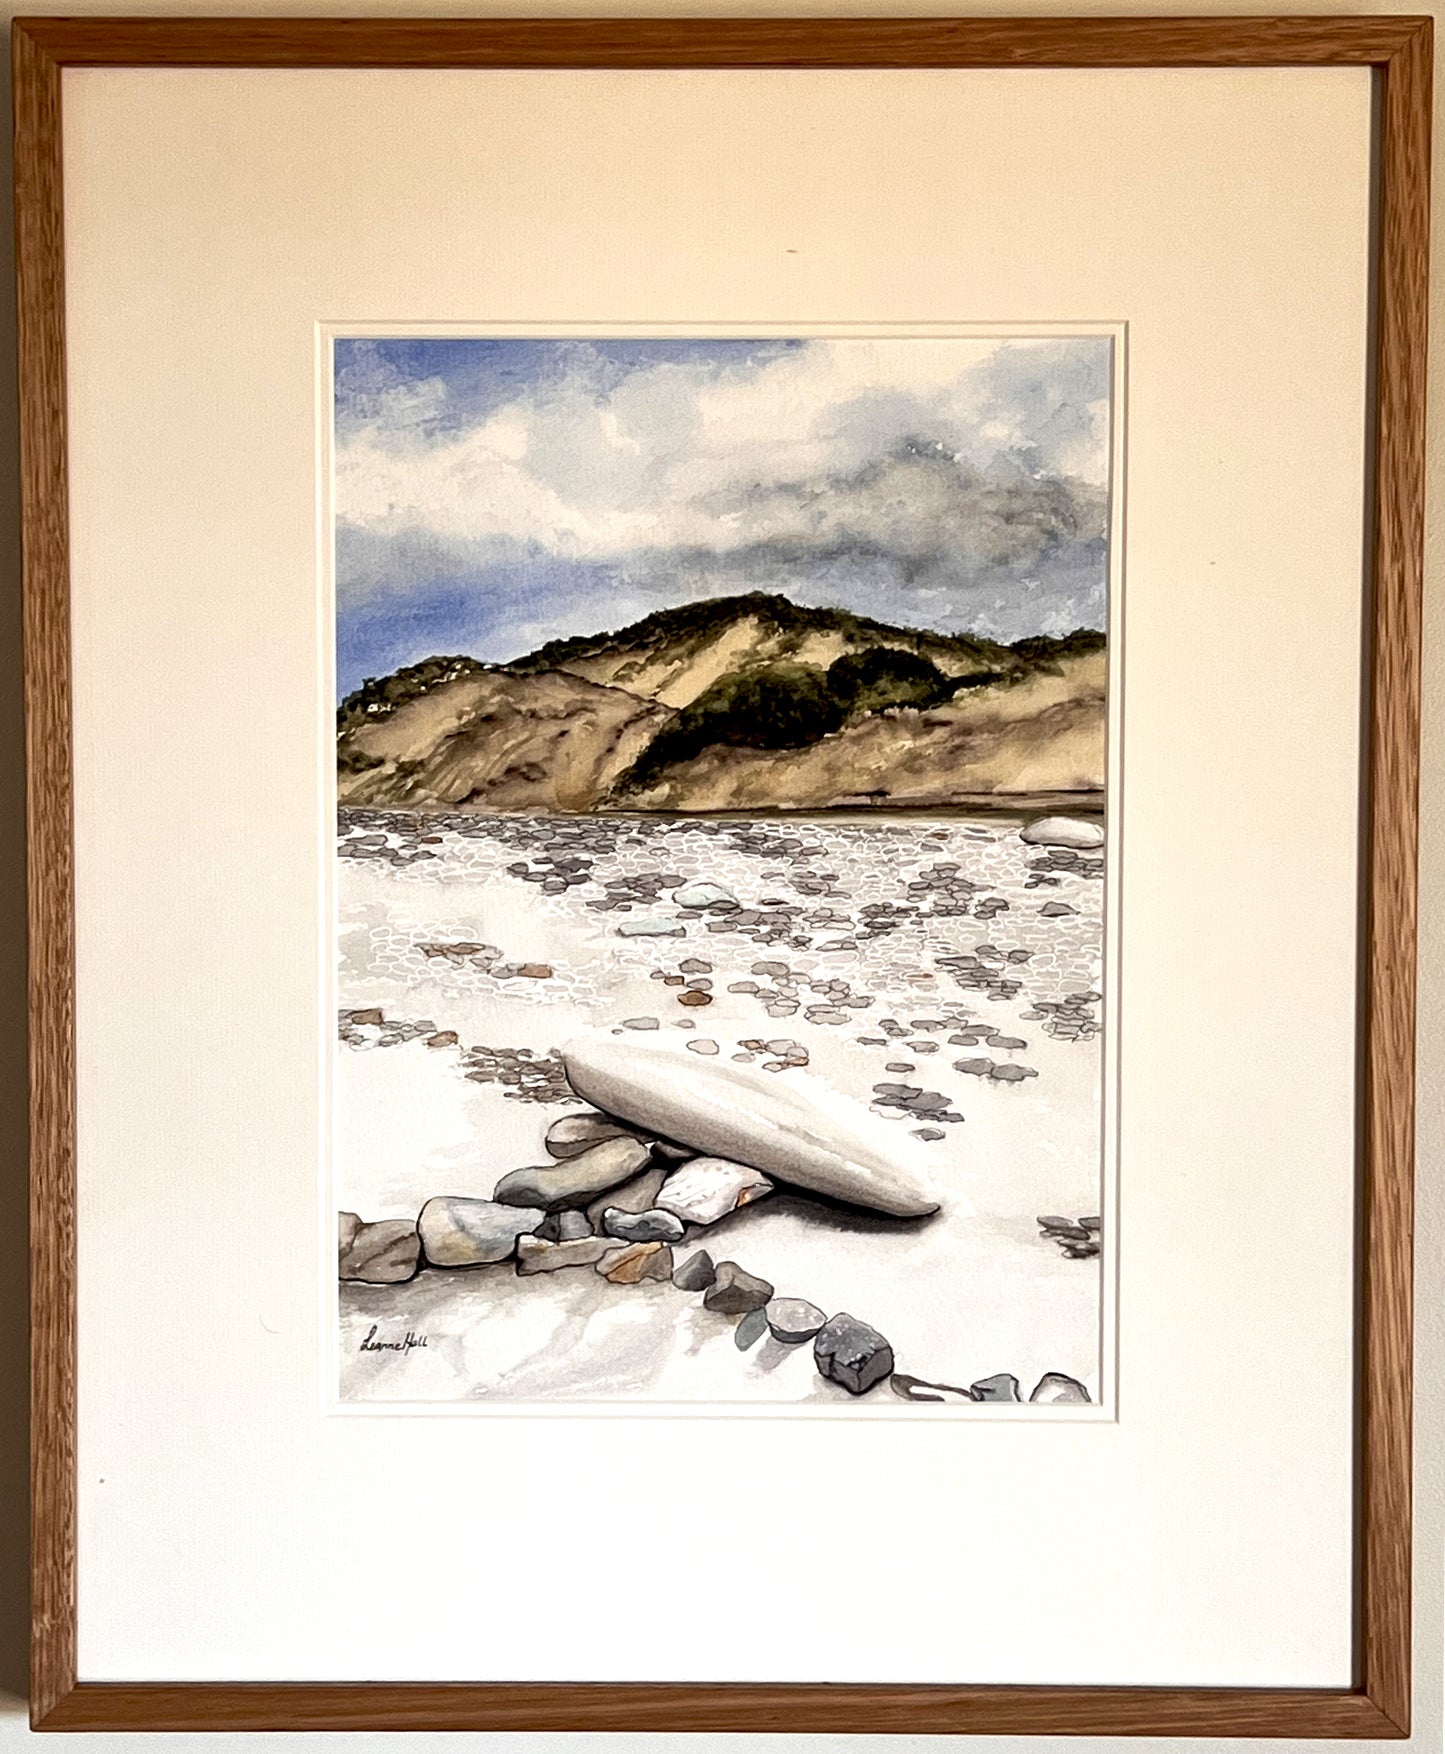 Shadows - framed watercolour painting by Leanne Hall